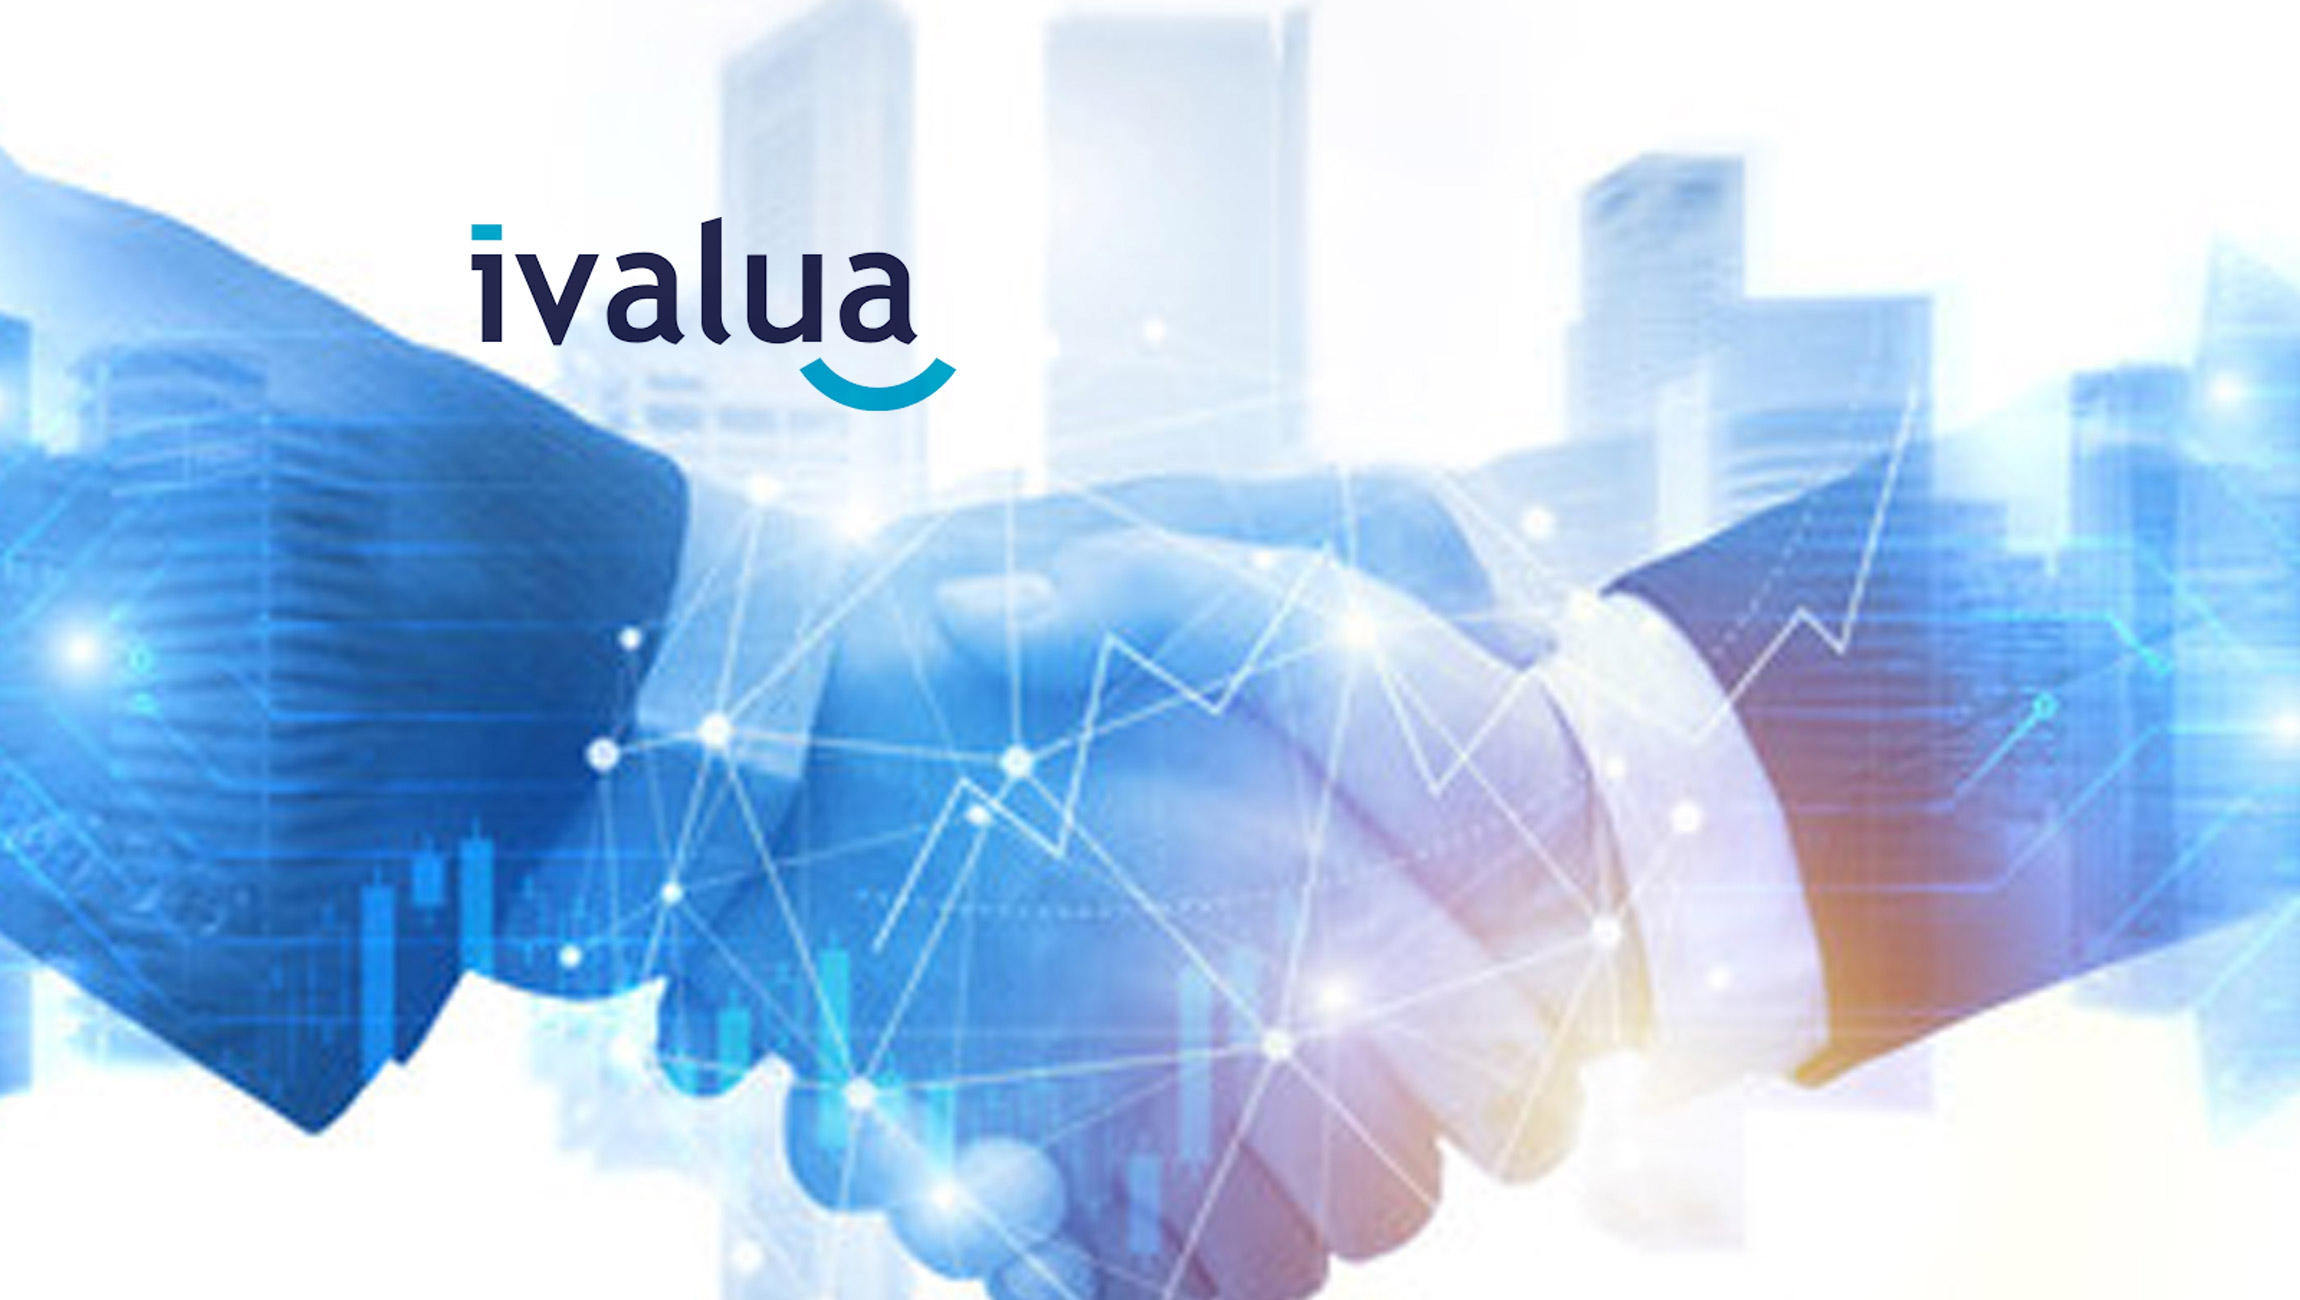 Ivalua Partners with Hillenbrand to Centralize its Data and Improve Visibility across its Supply Base